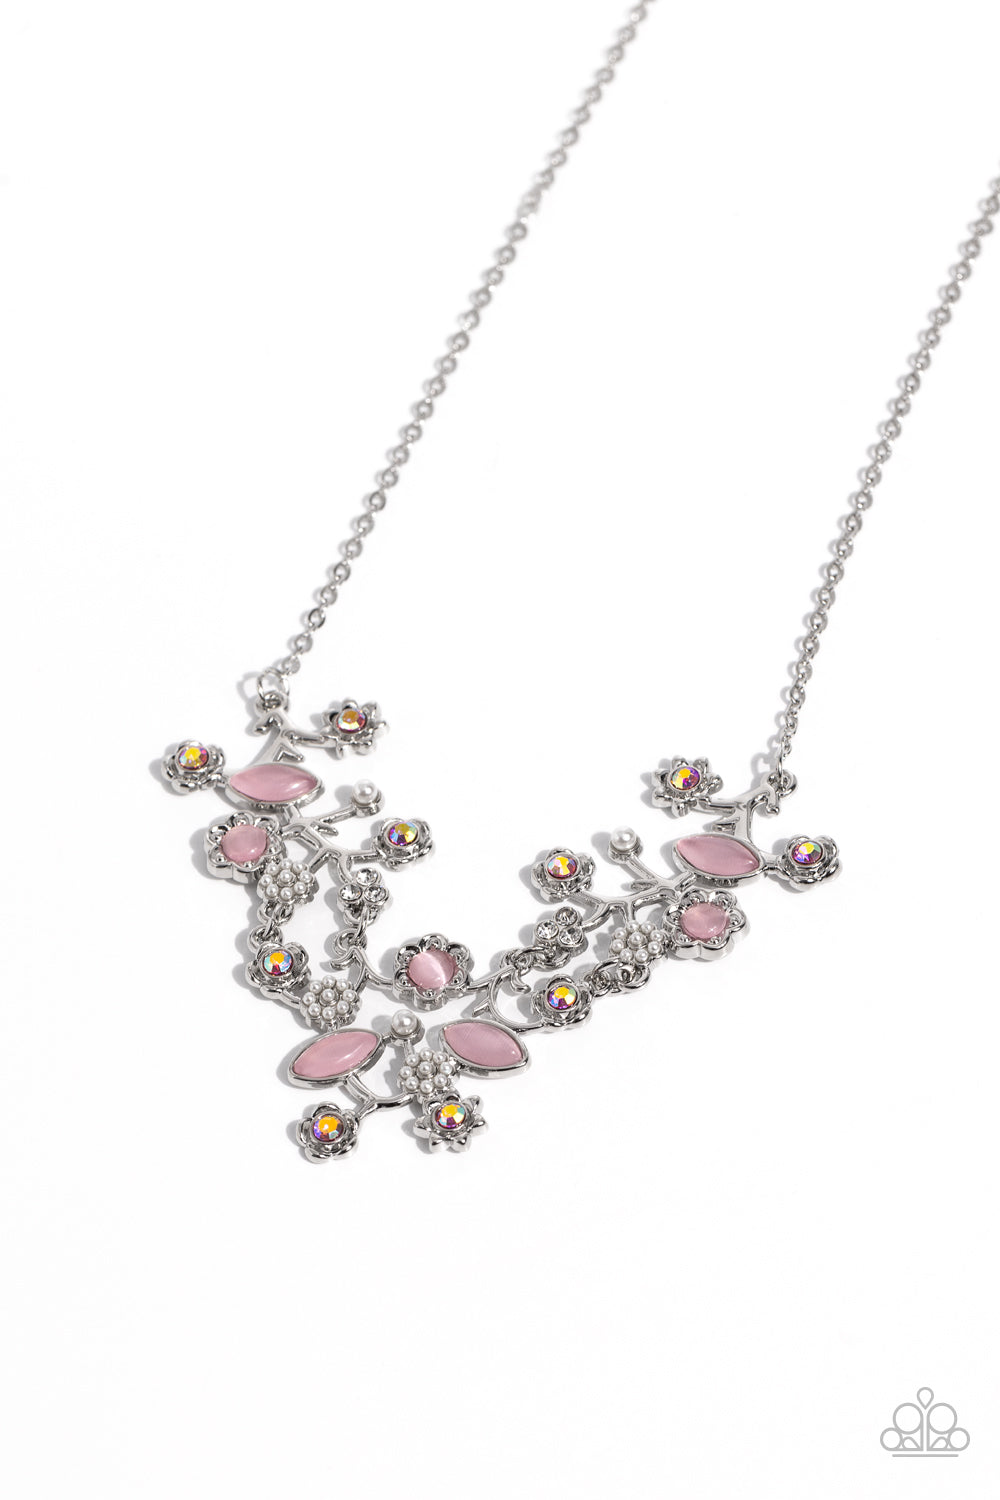 Paparazzi Necklaces - Gardening Group - Pink